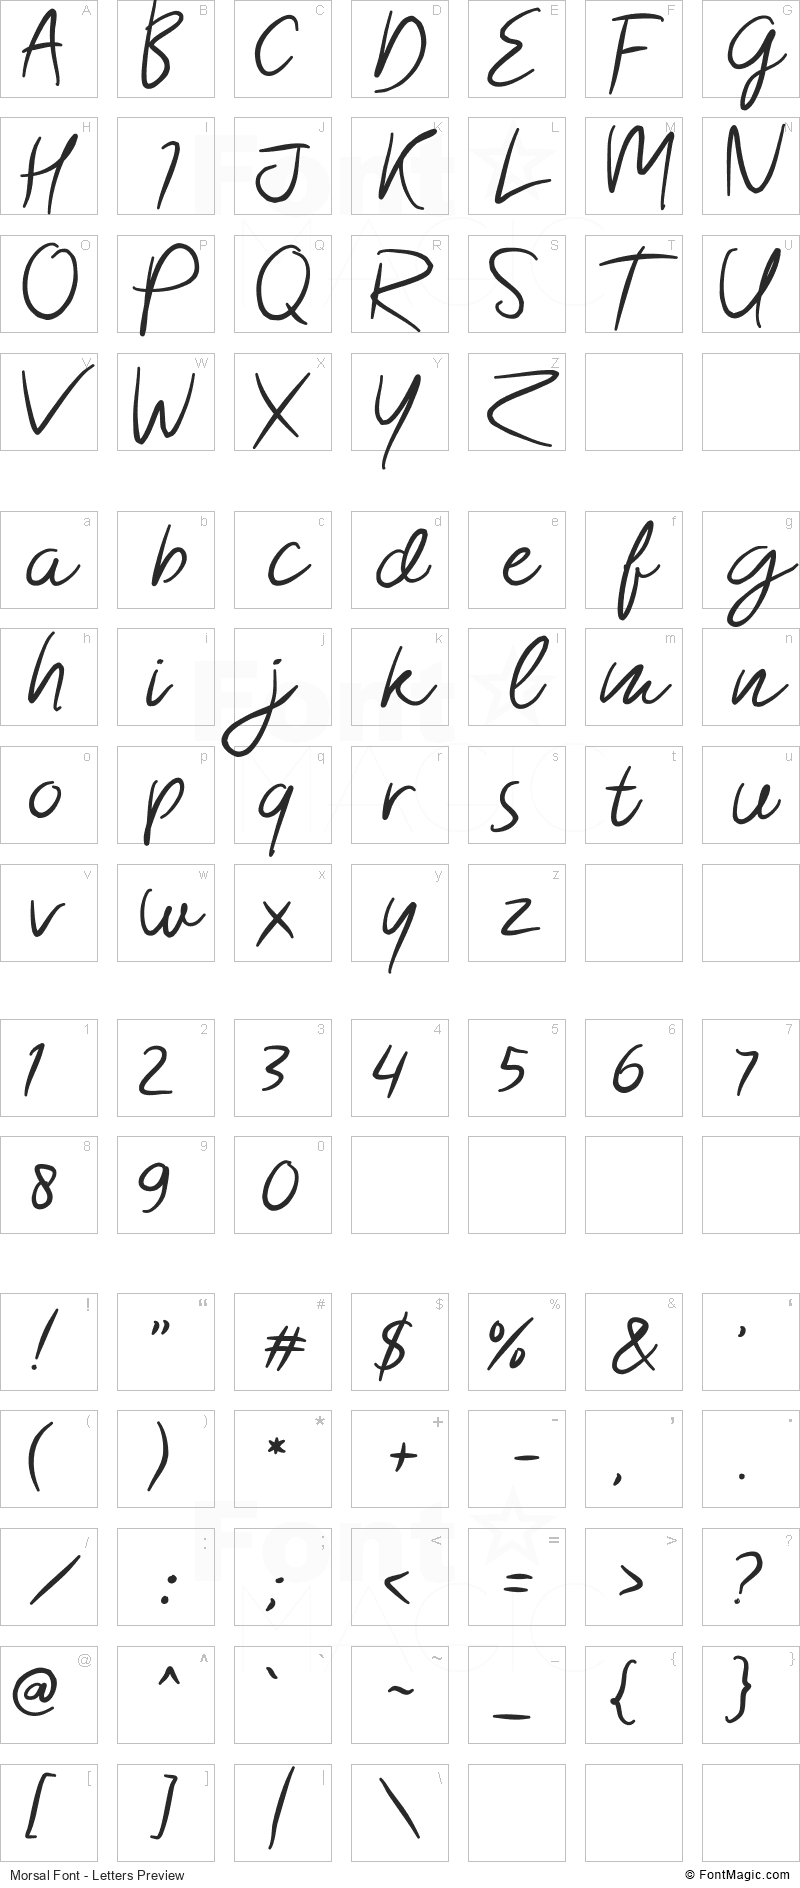 Morsal Font - All Latters Preview Chart